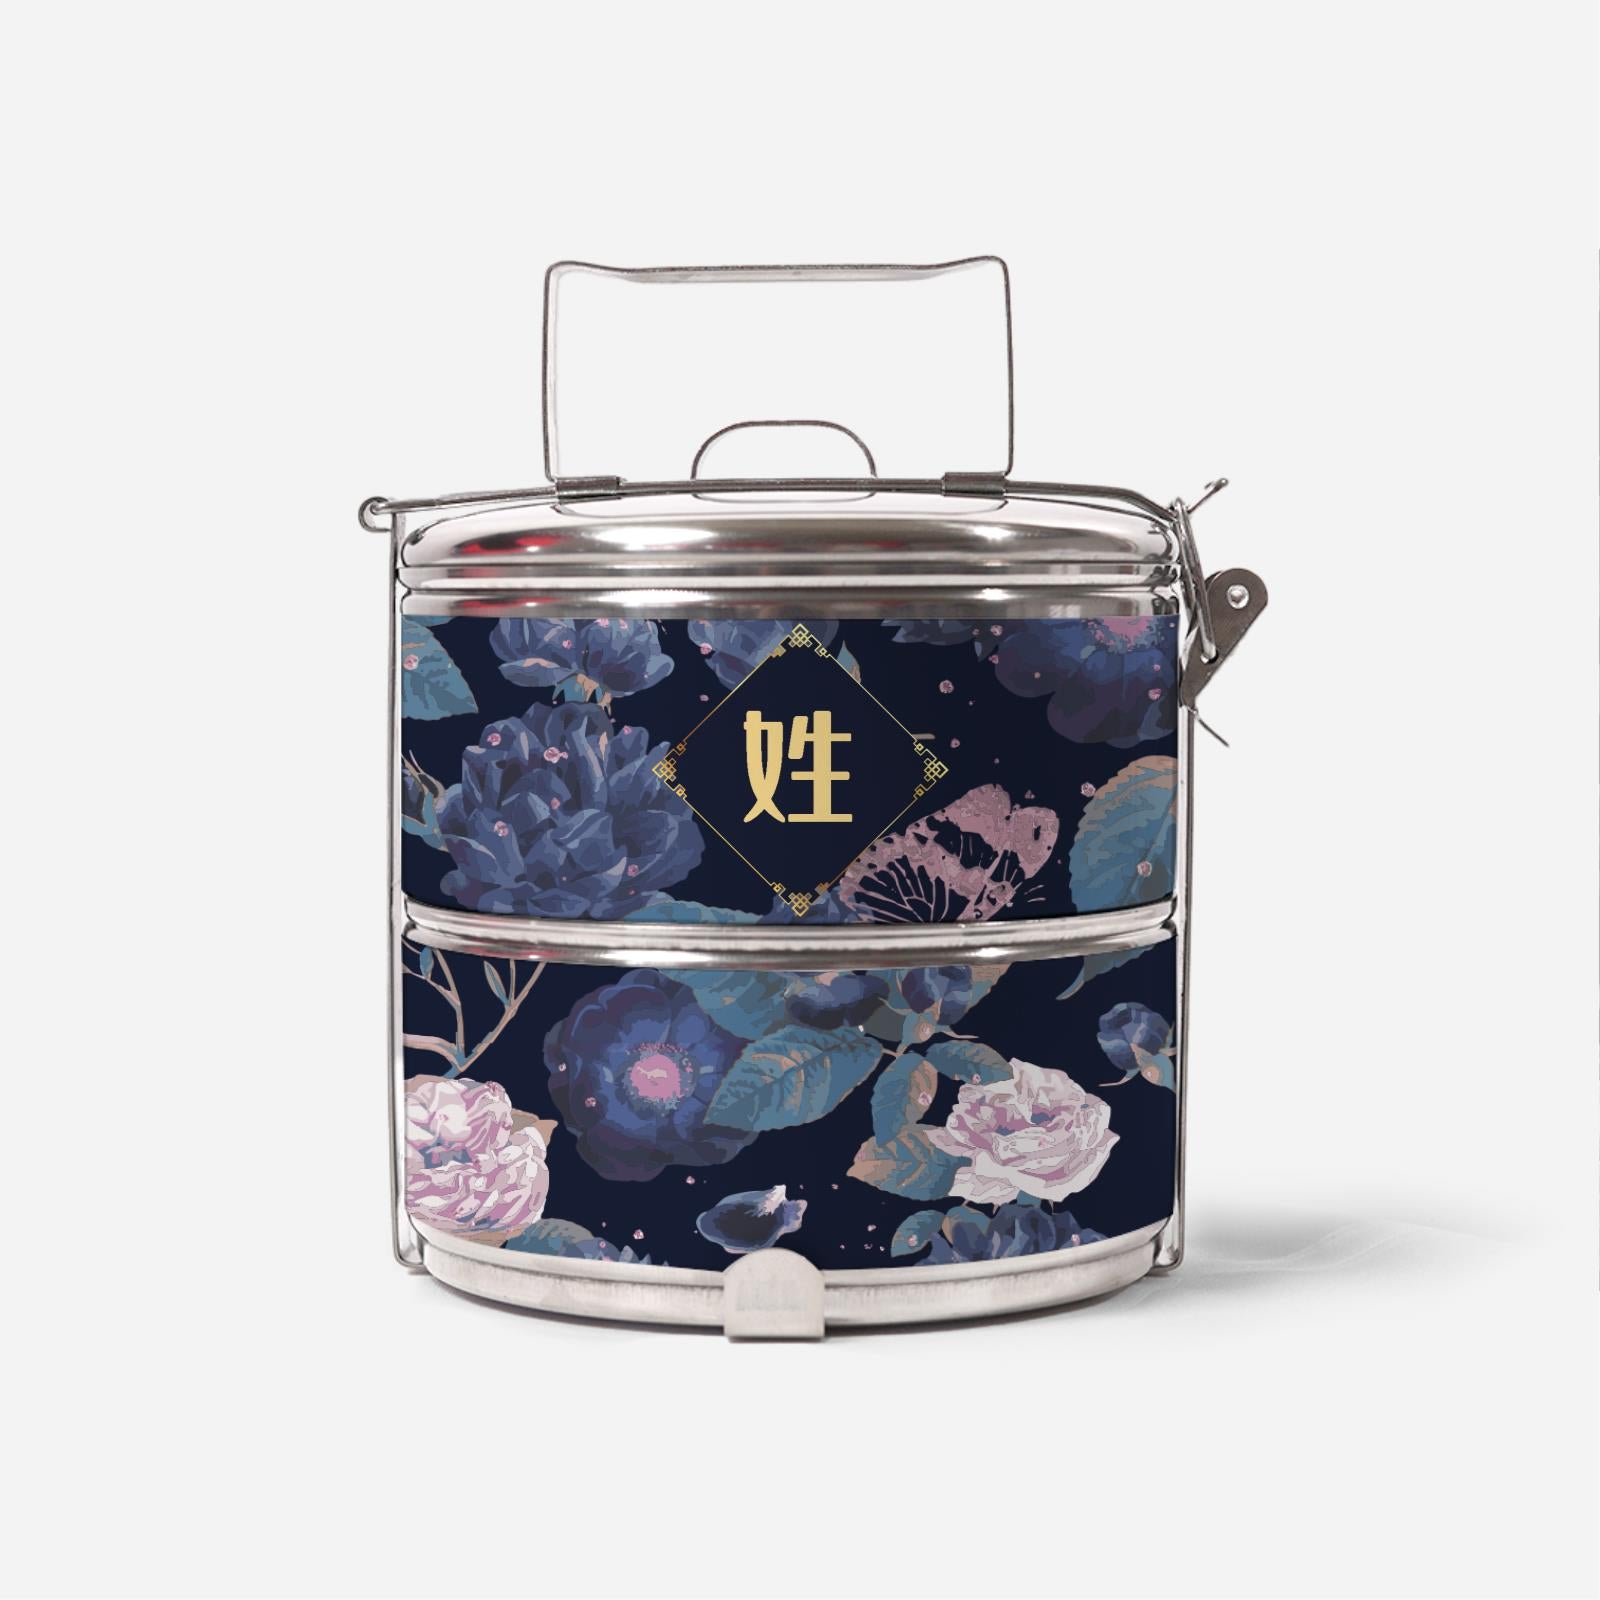 Royal Floral Series With Chinese Surname Two Tier Standard Tiffin Carrier - Serene Moonlight